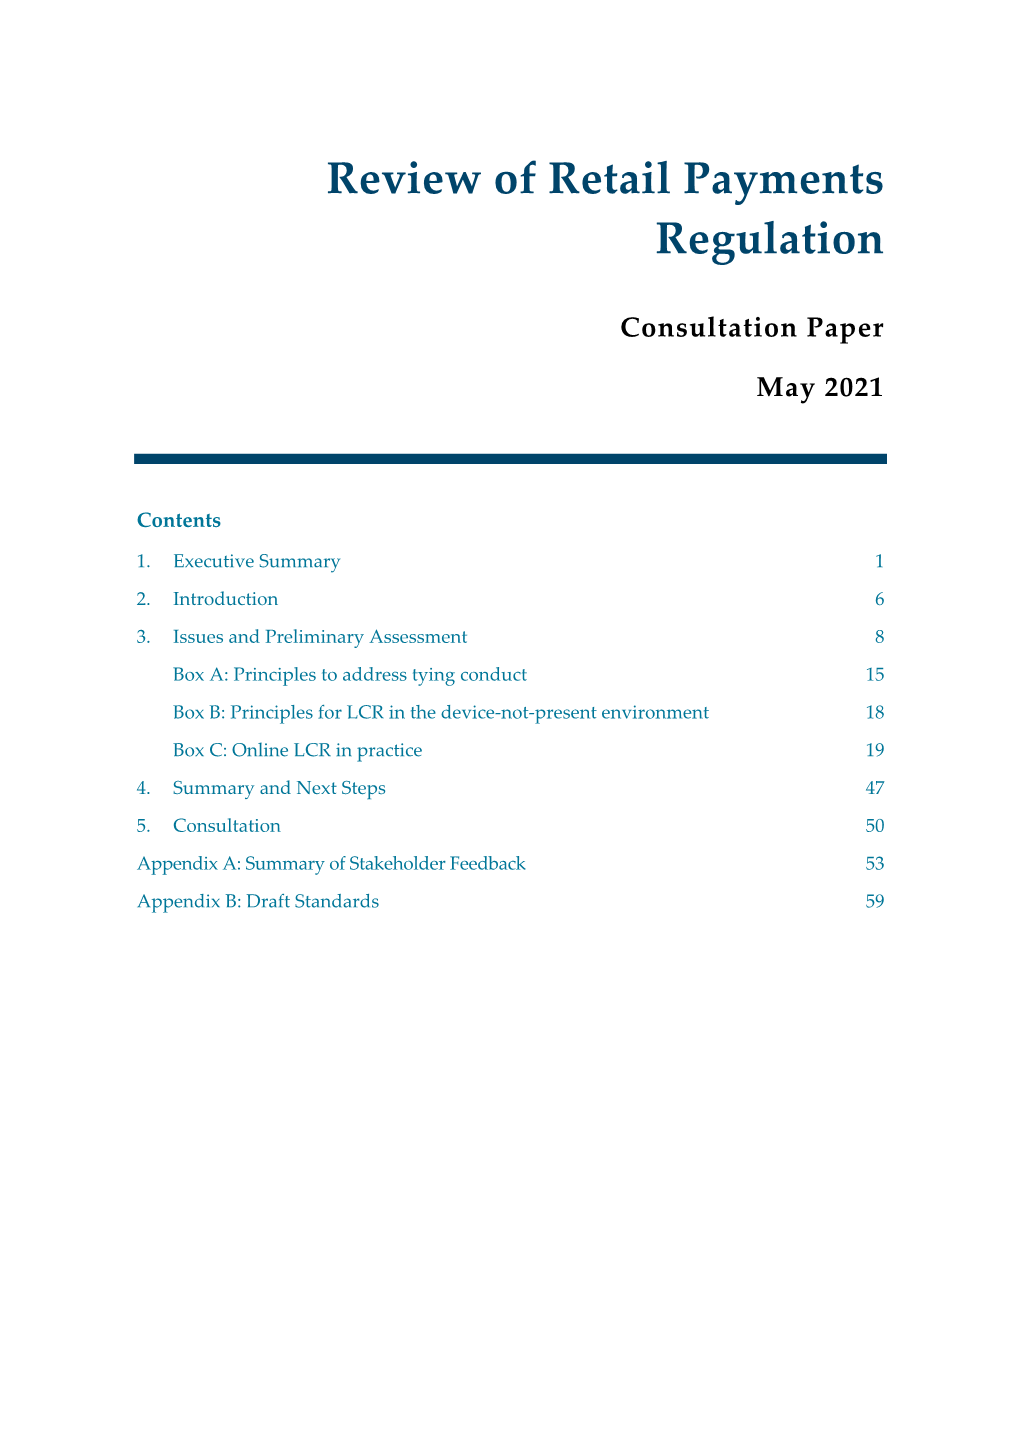 Review of Retail Payments Regulation